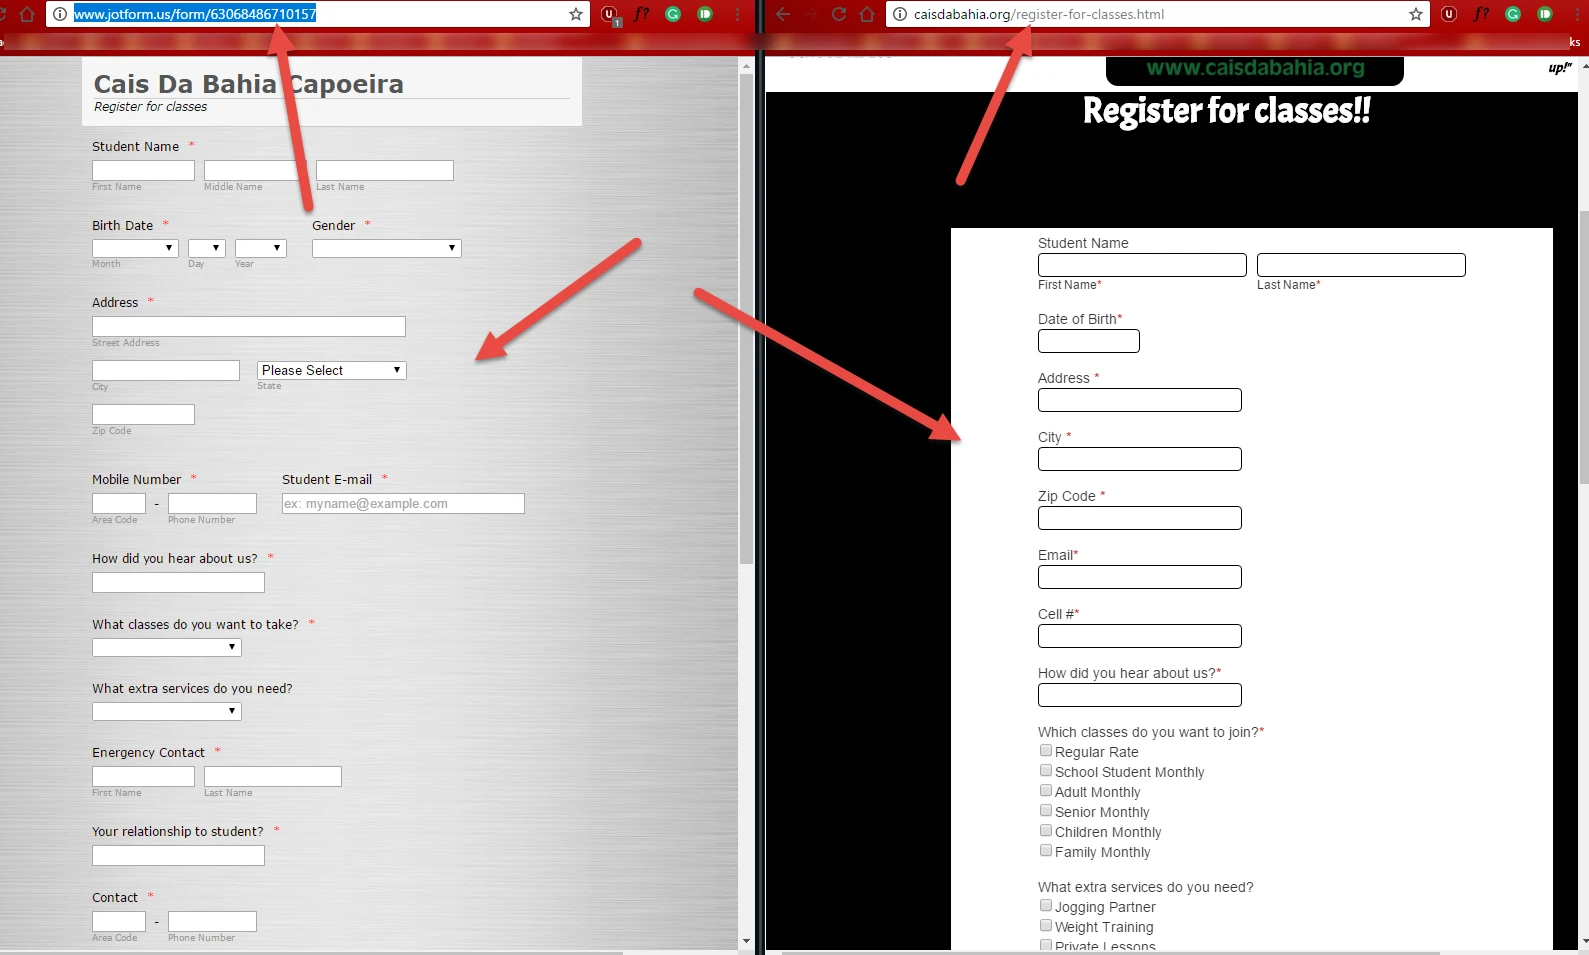 Form is being cut off at the end Image 1 Screenshot 20